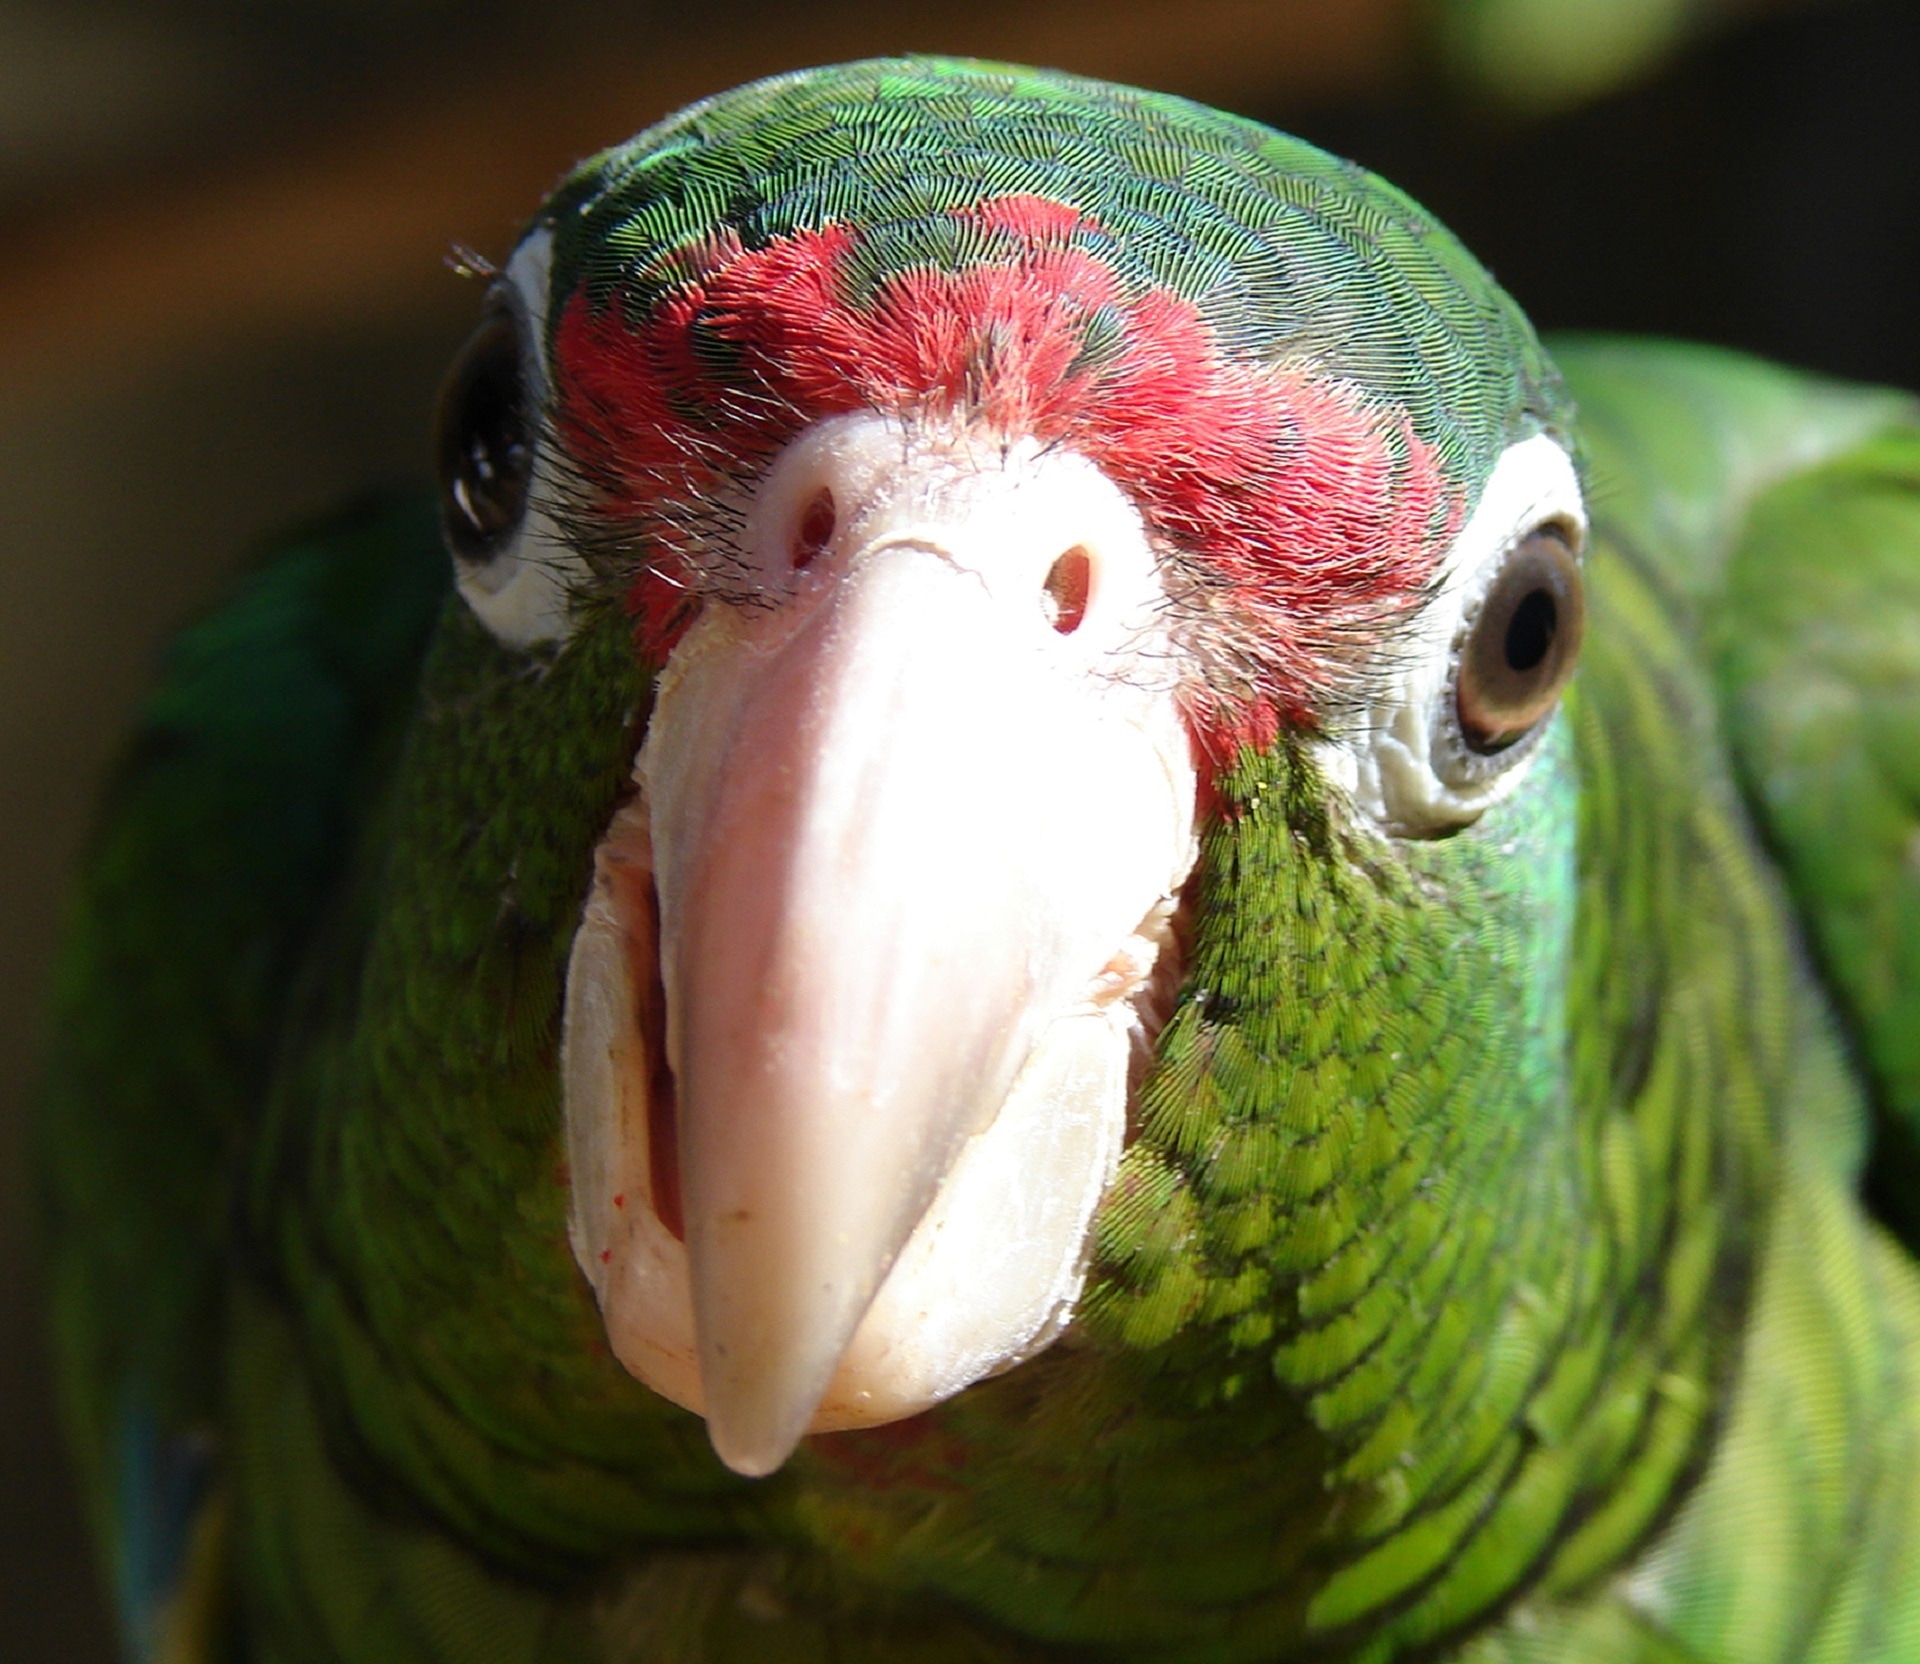 green and red parrot